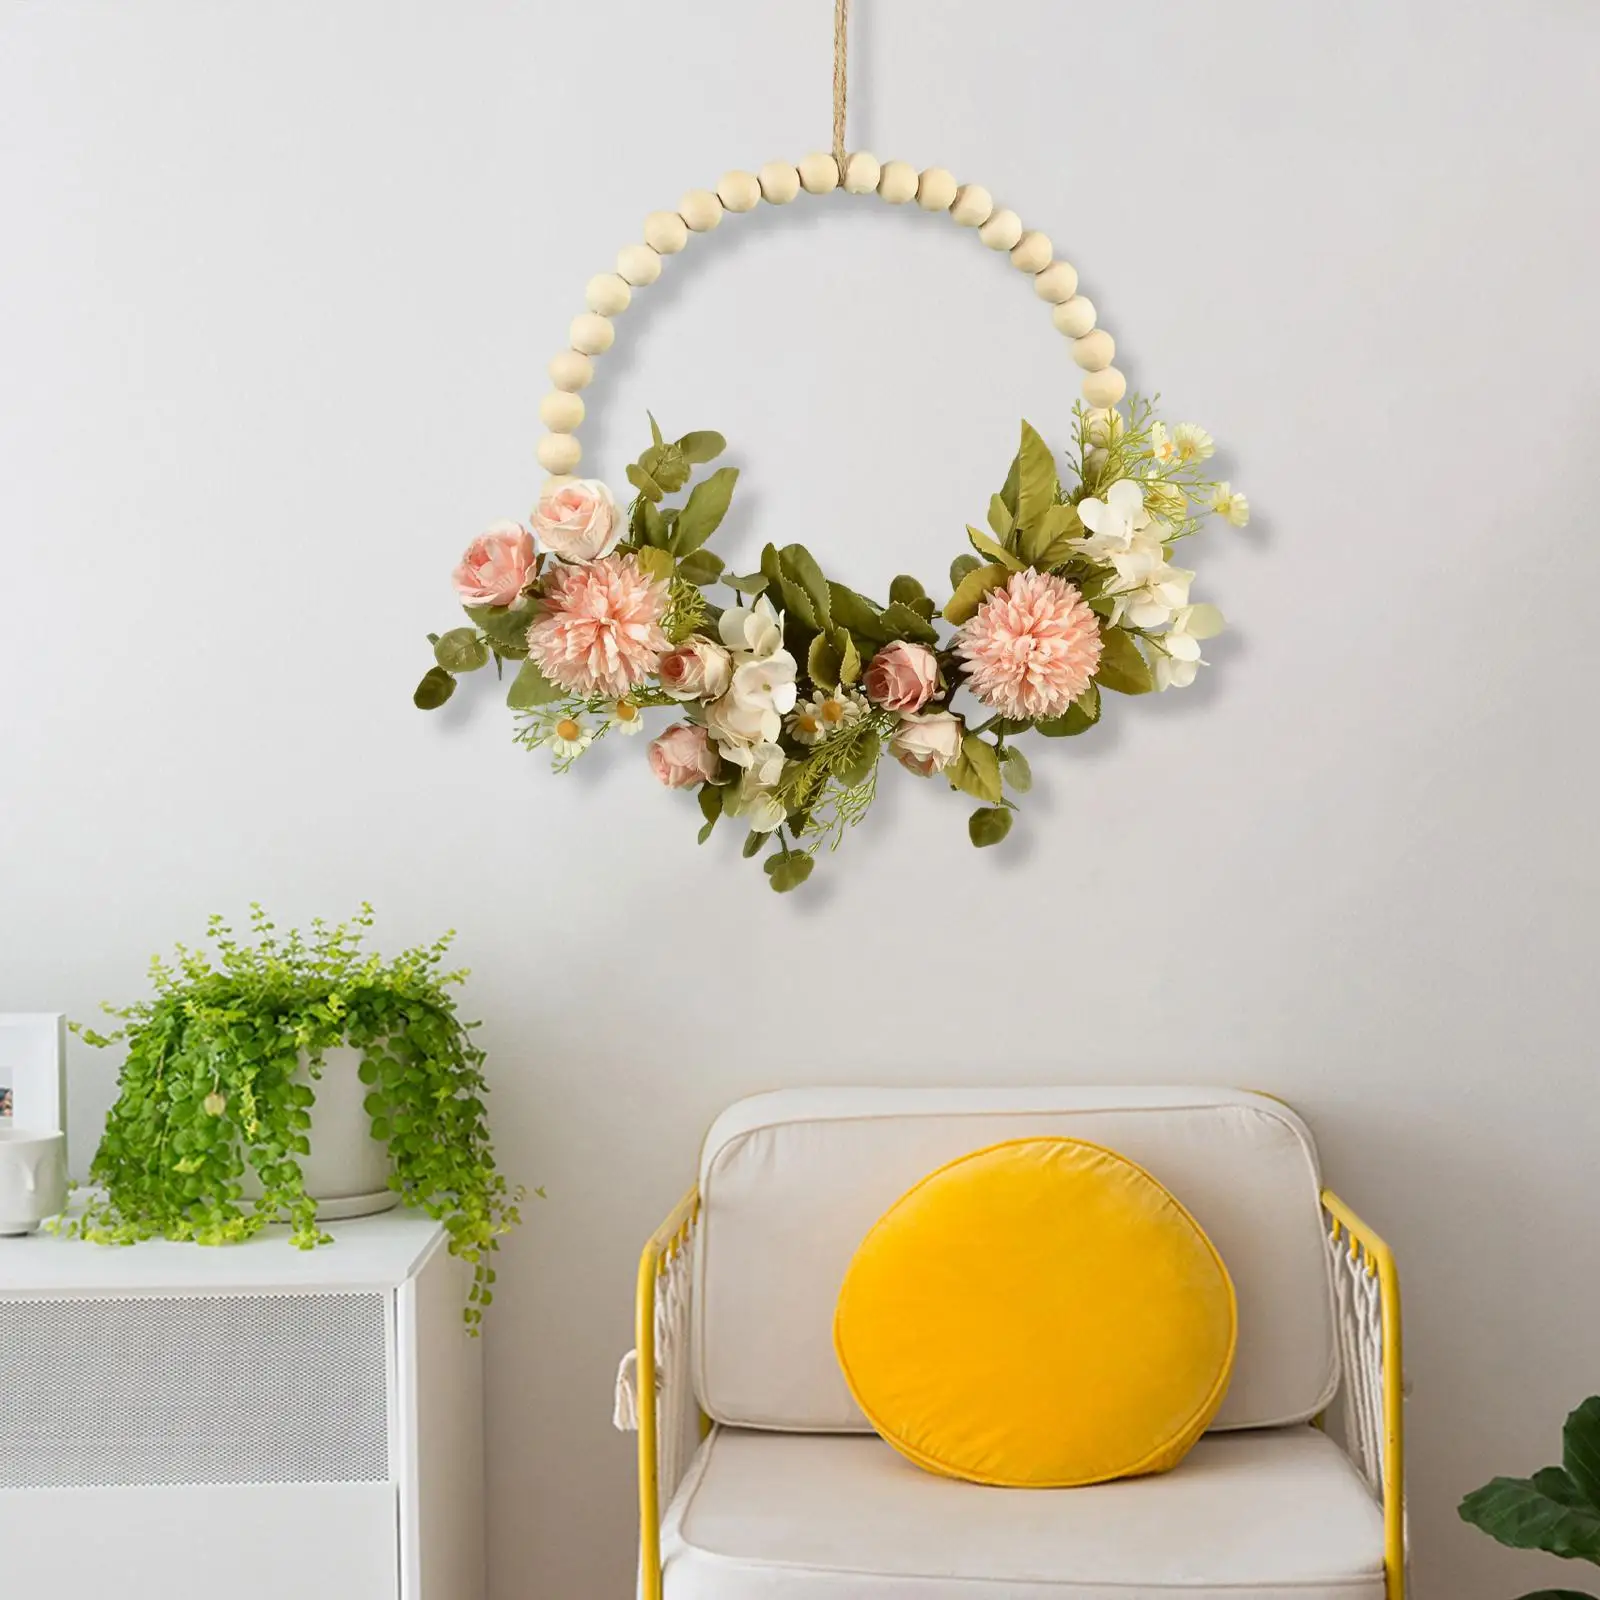 Artificial Flower Wreath Garland Wood Beads Hoop Green Leaves Wall for Home Farmhouse Wedding Party Decoration Ornament